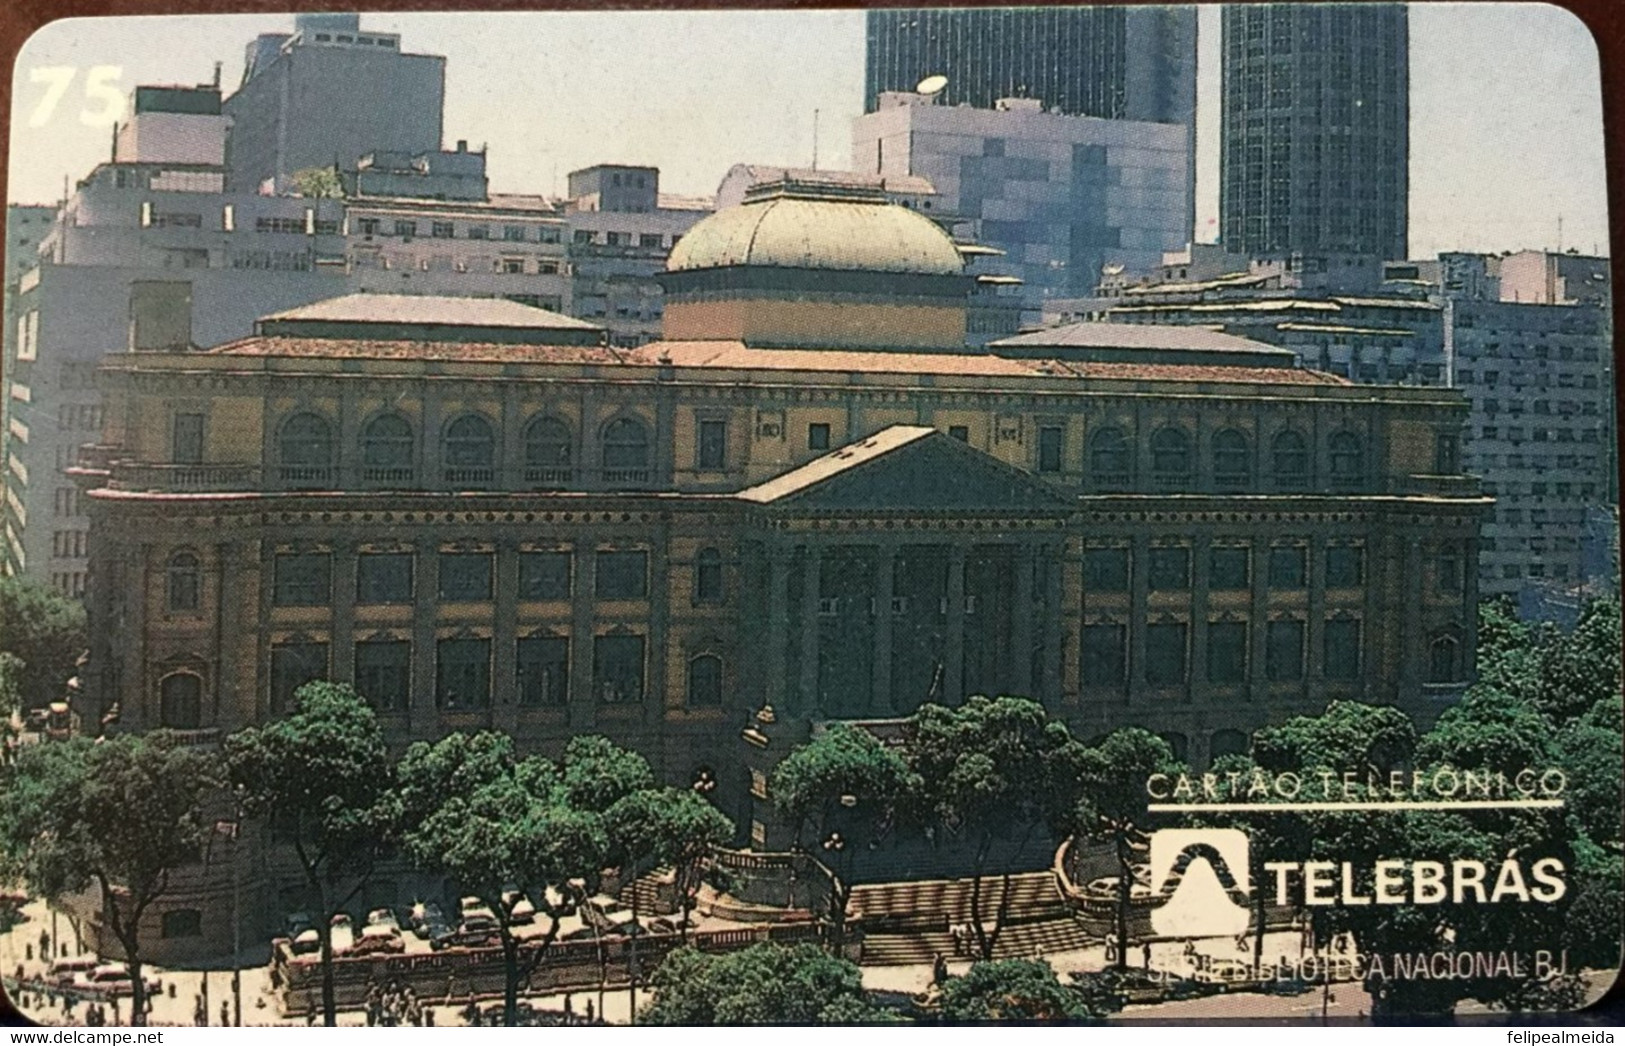 Phone Card Produced By Telebras In 1996 - Series National Library Of Rio De Janeiro - Photo Of The Building Headquarters - Culture